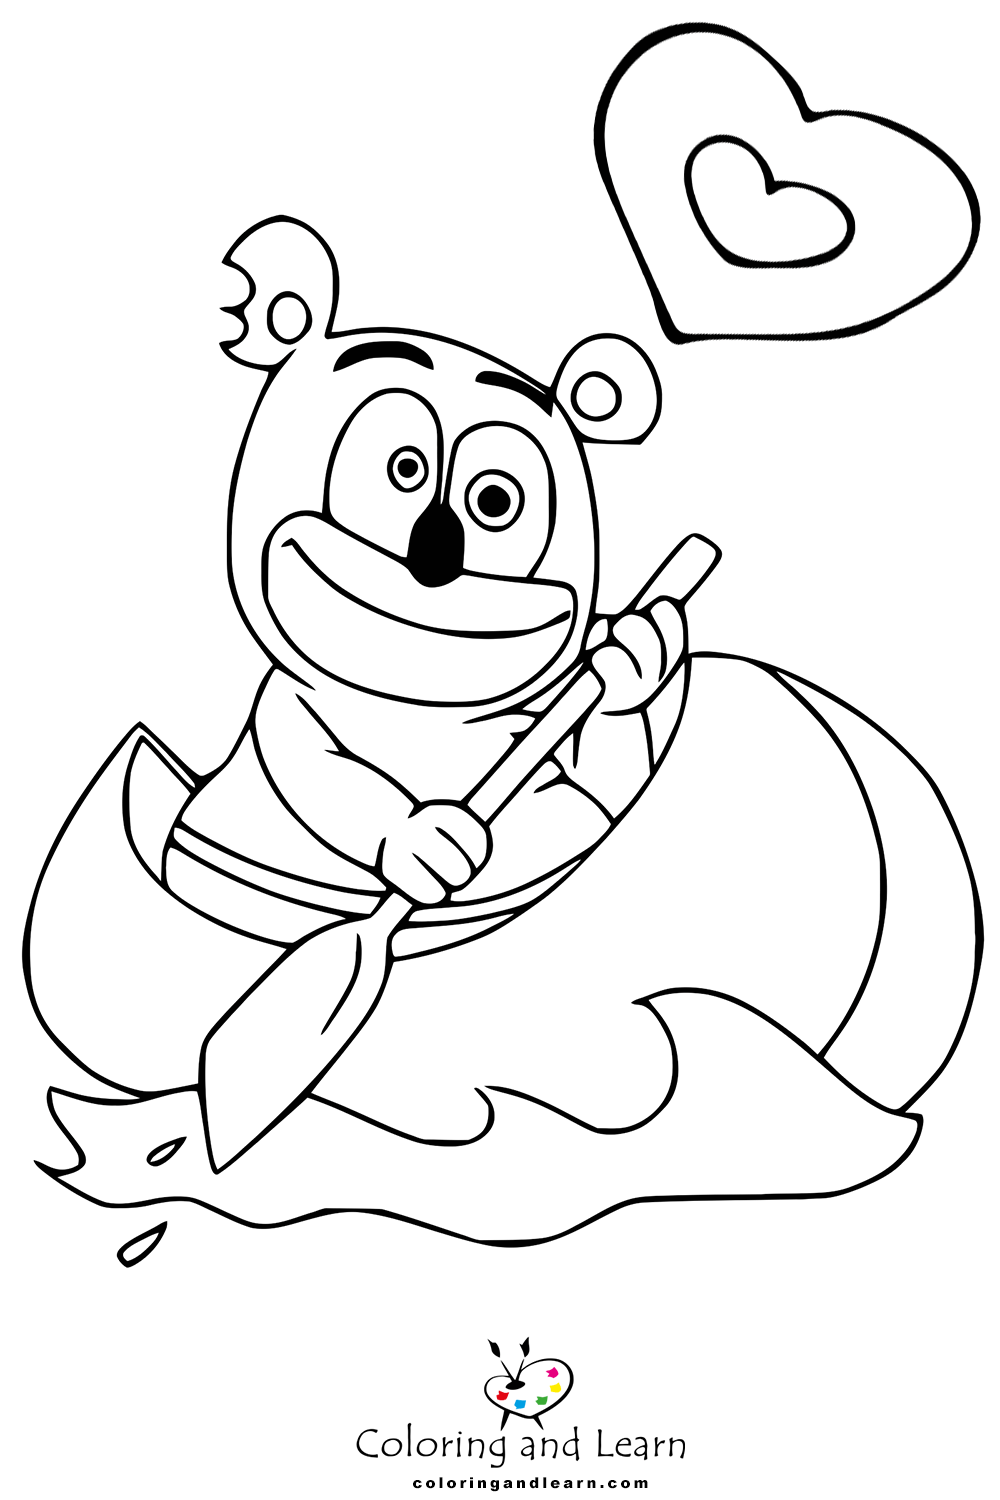 Gummy bear coloring pages rcoloringpages